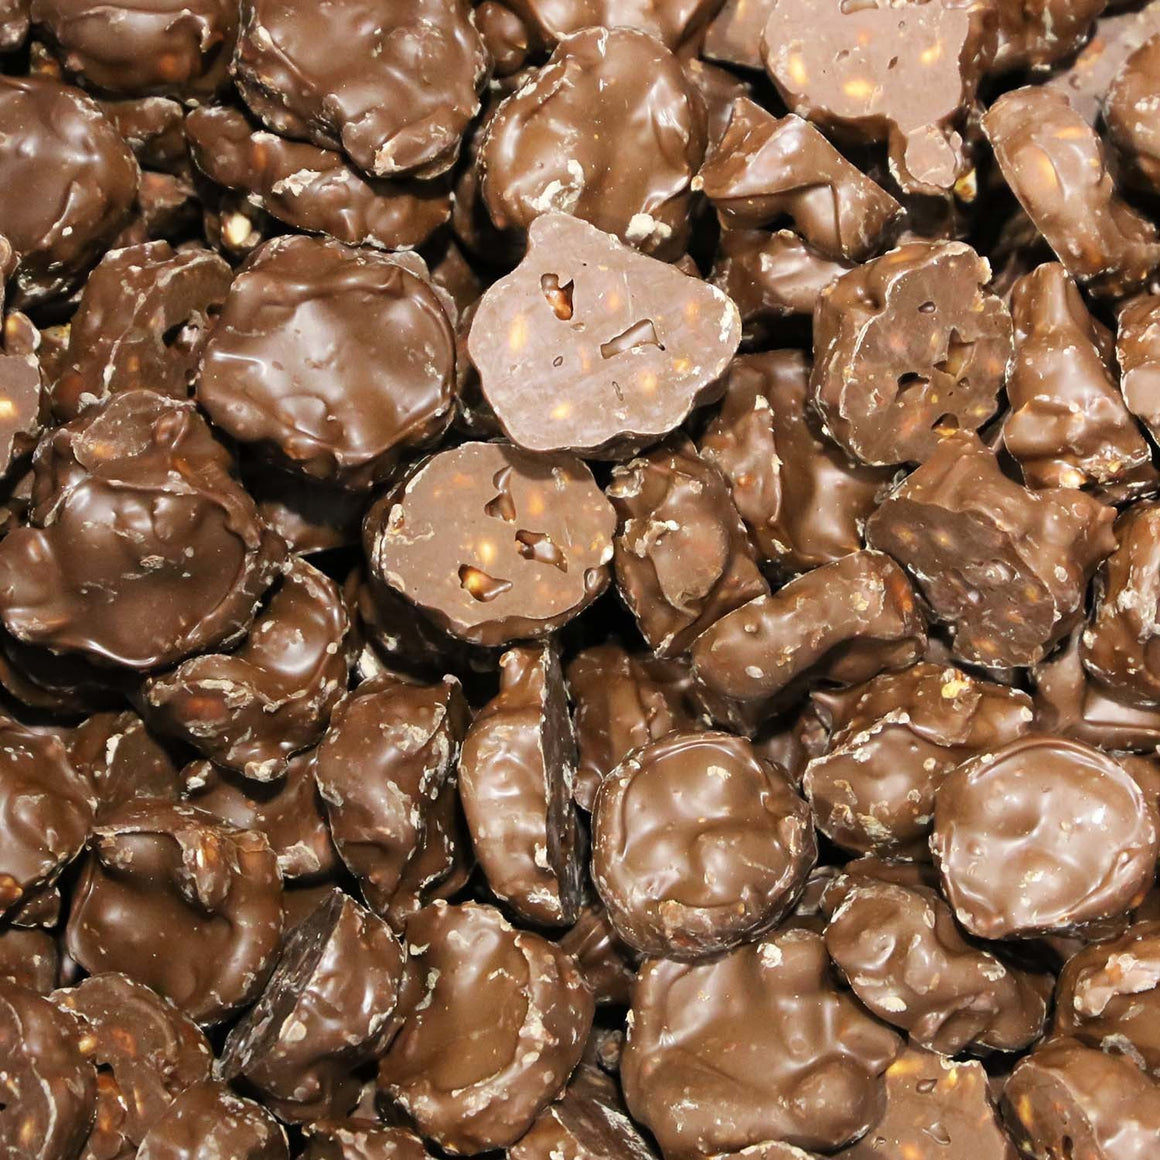 All City Candy Milk Chocolate Peanut Clusters - 3 LB Bulk Bag Bulk Unwrapped Zachary For fresh candy and great service, visit www.allcitycandy.com